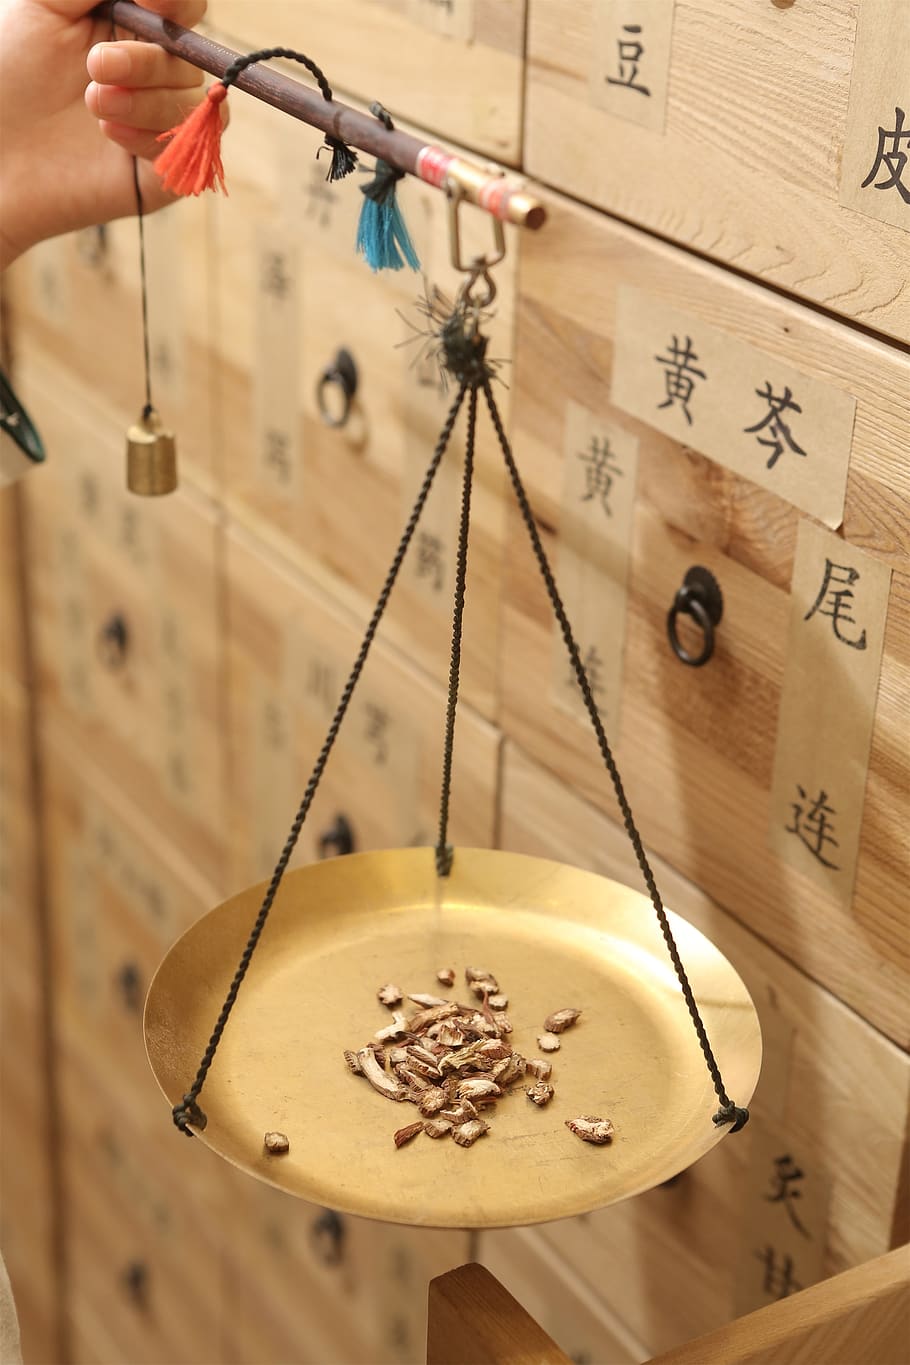 chinese medicine, traditional chinese medicine weighing scales, traditional chinese, indoors, human hand, hand, one person, human body part, holding, close-up